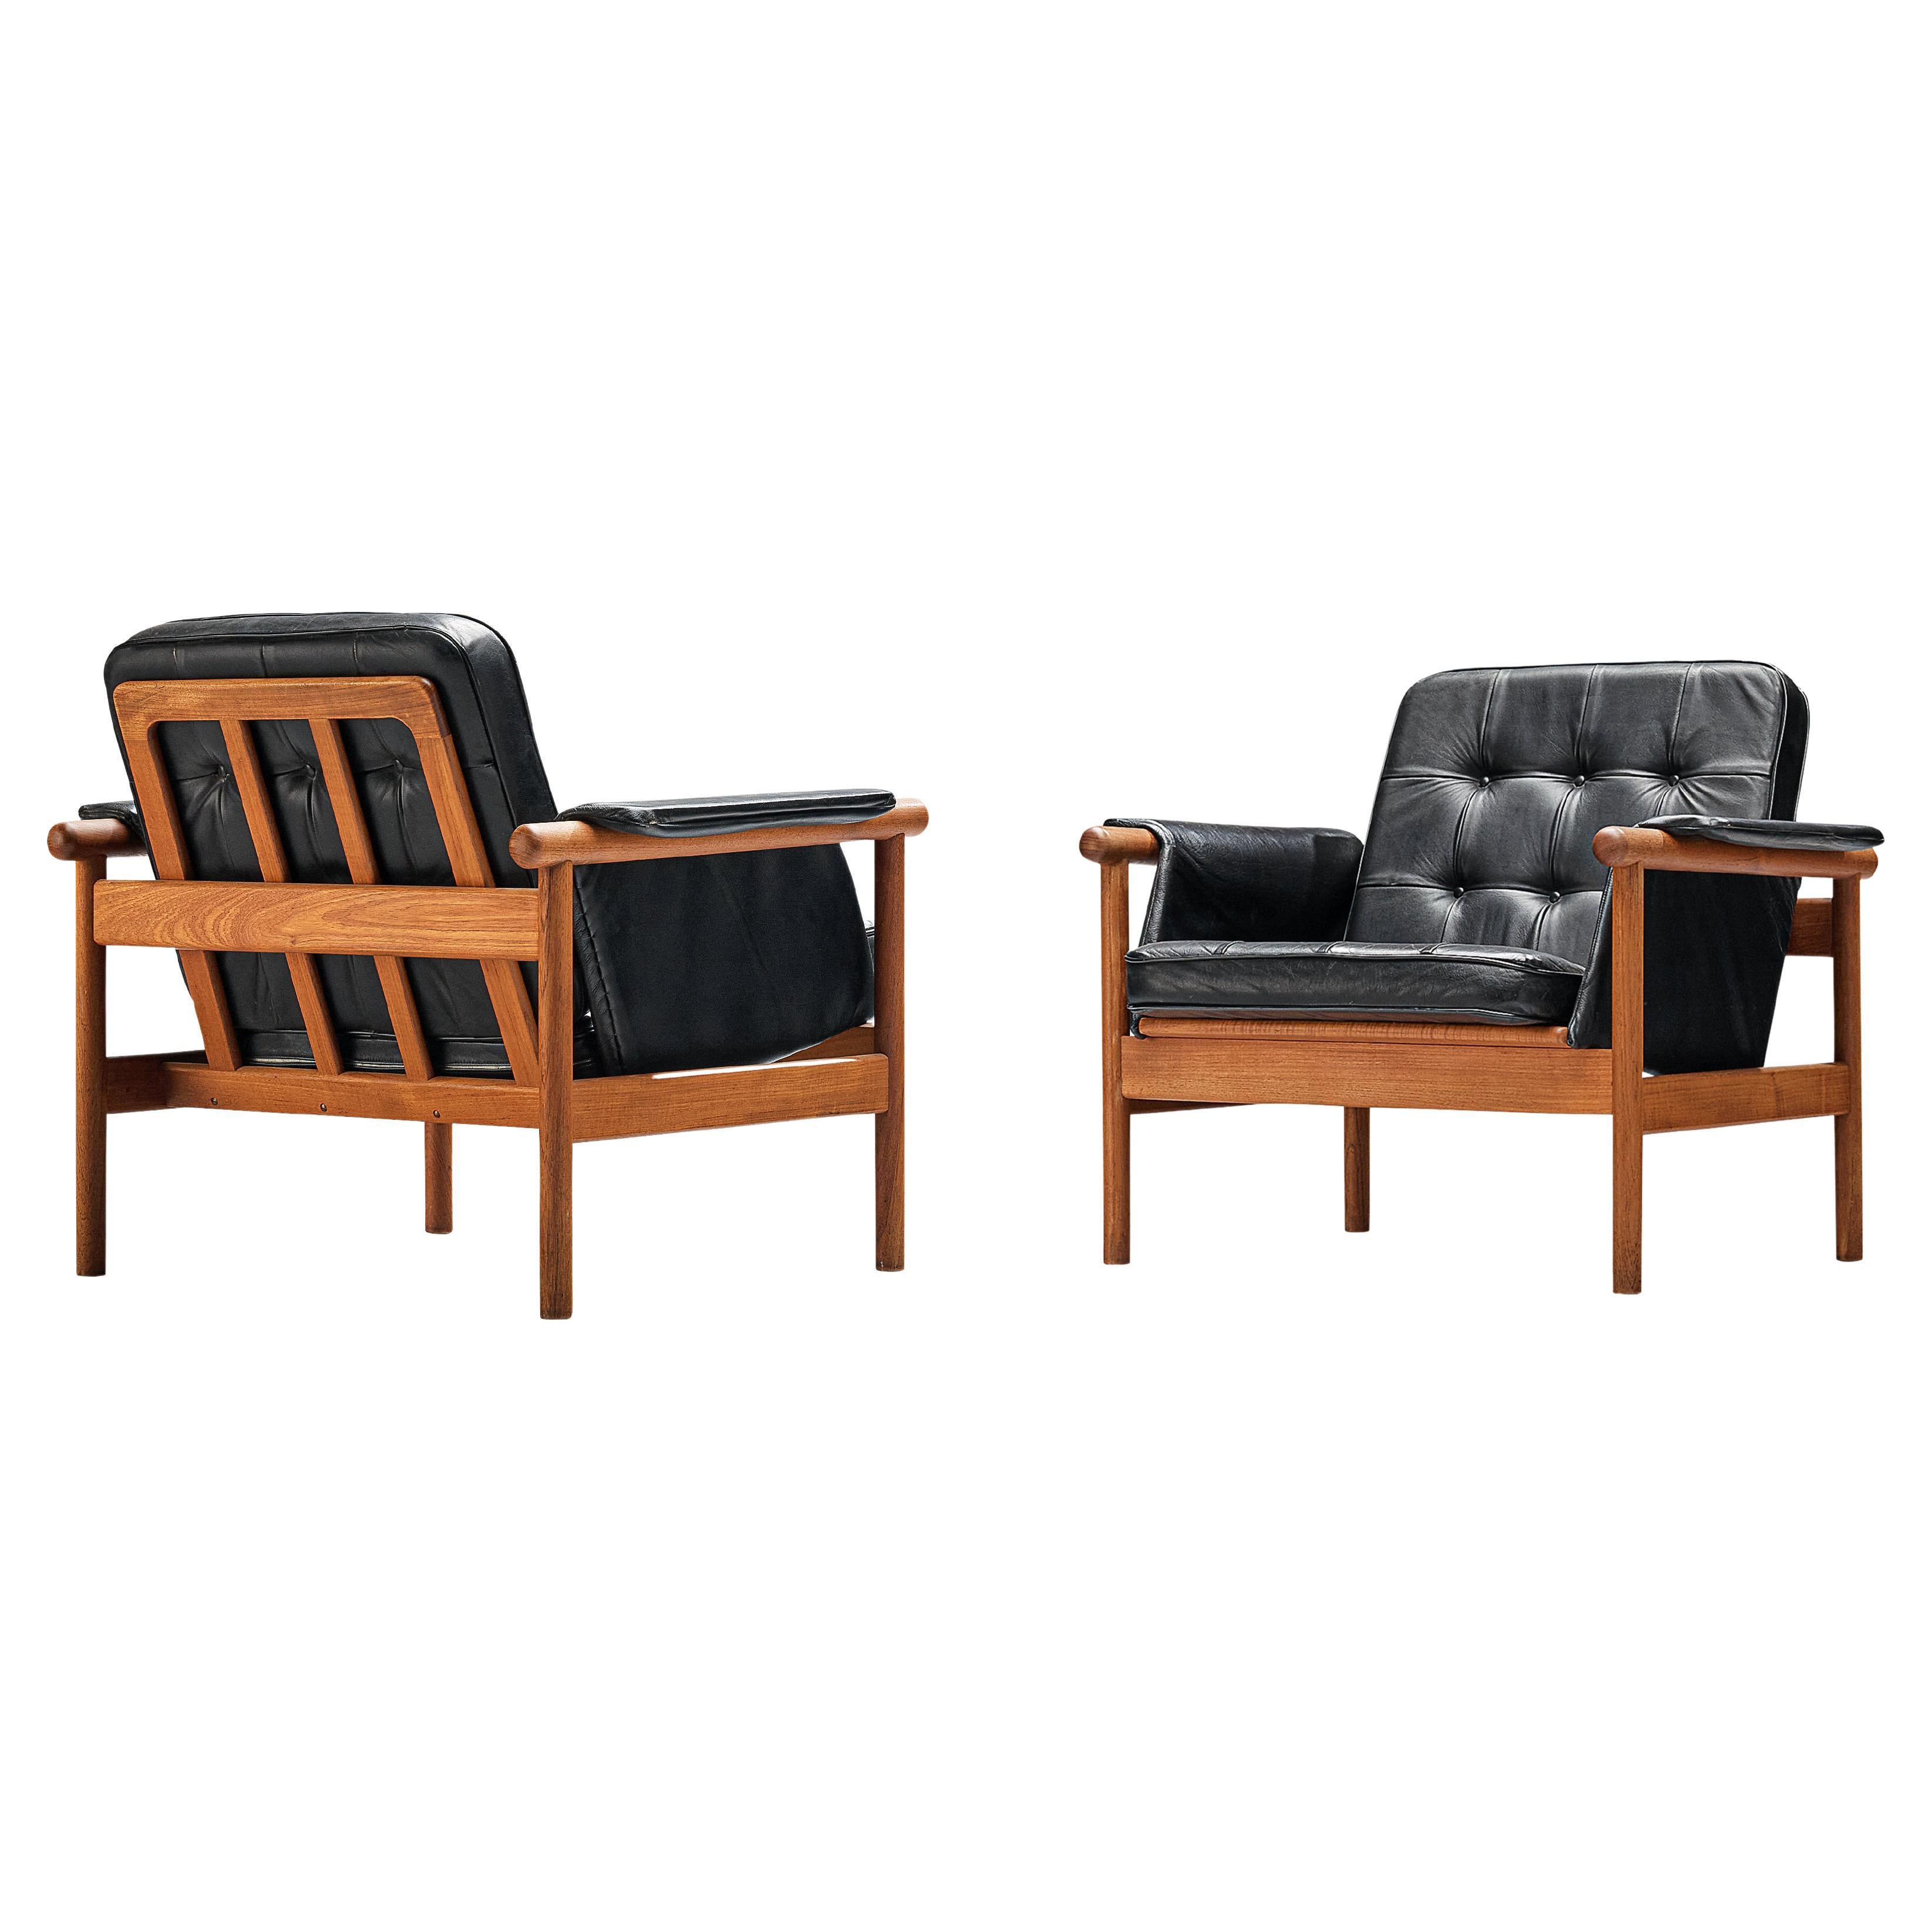 Illum Wikkelsø Pair of 'Wiki' Lounge Chairs in Teak and Black Leather